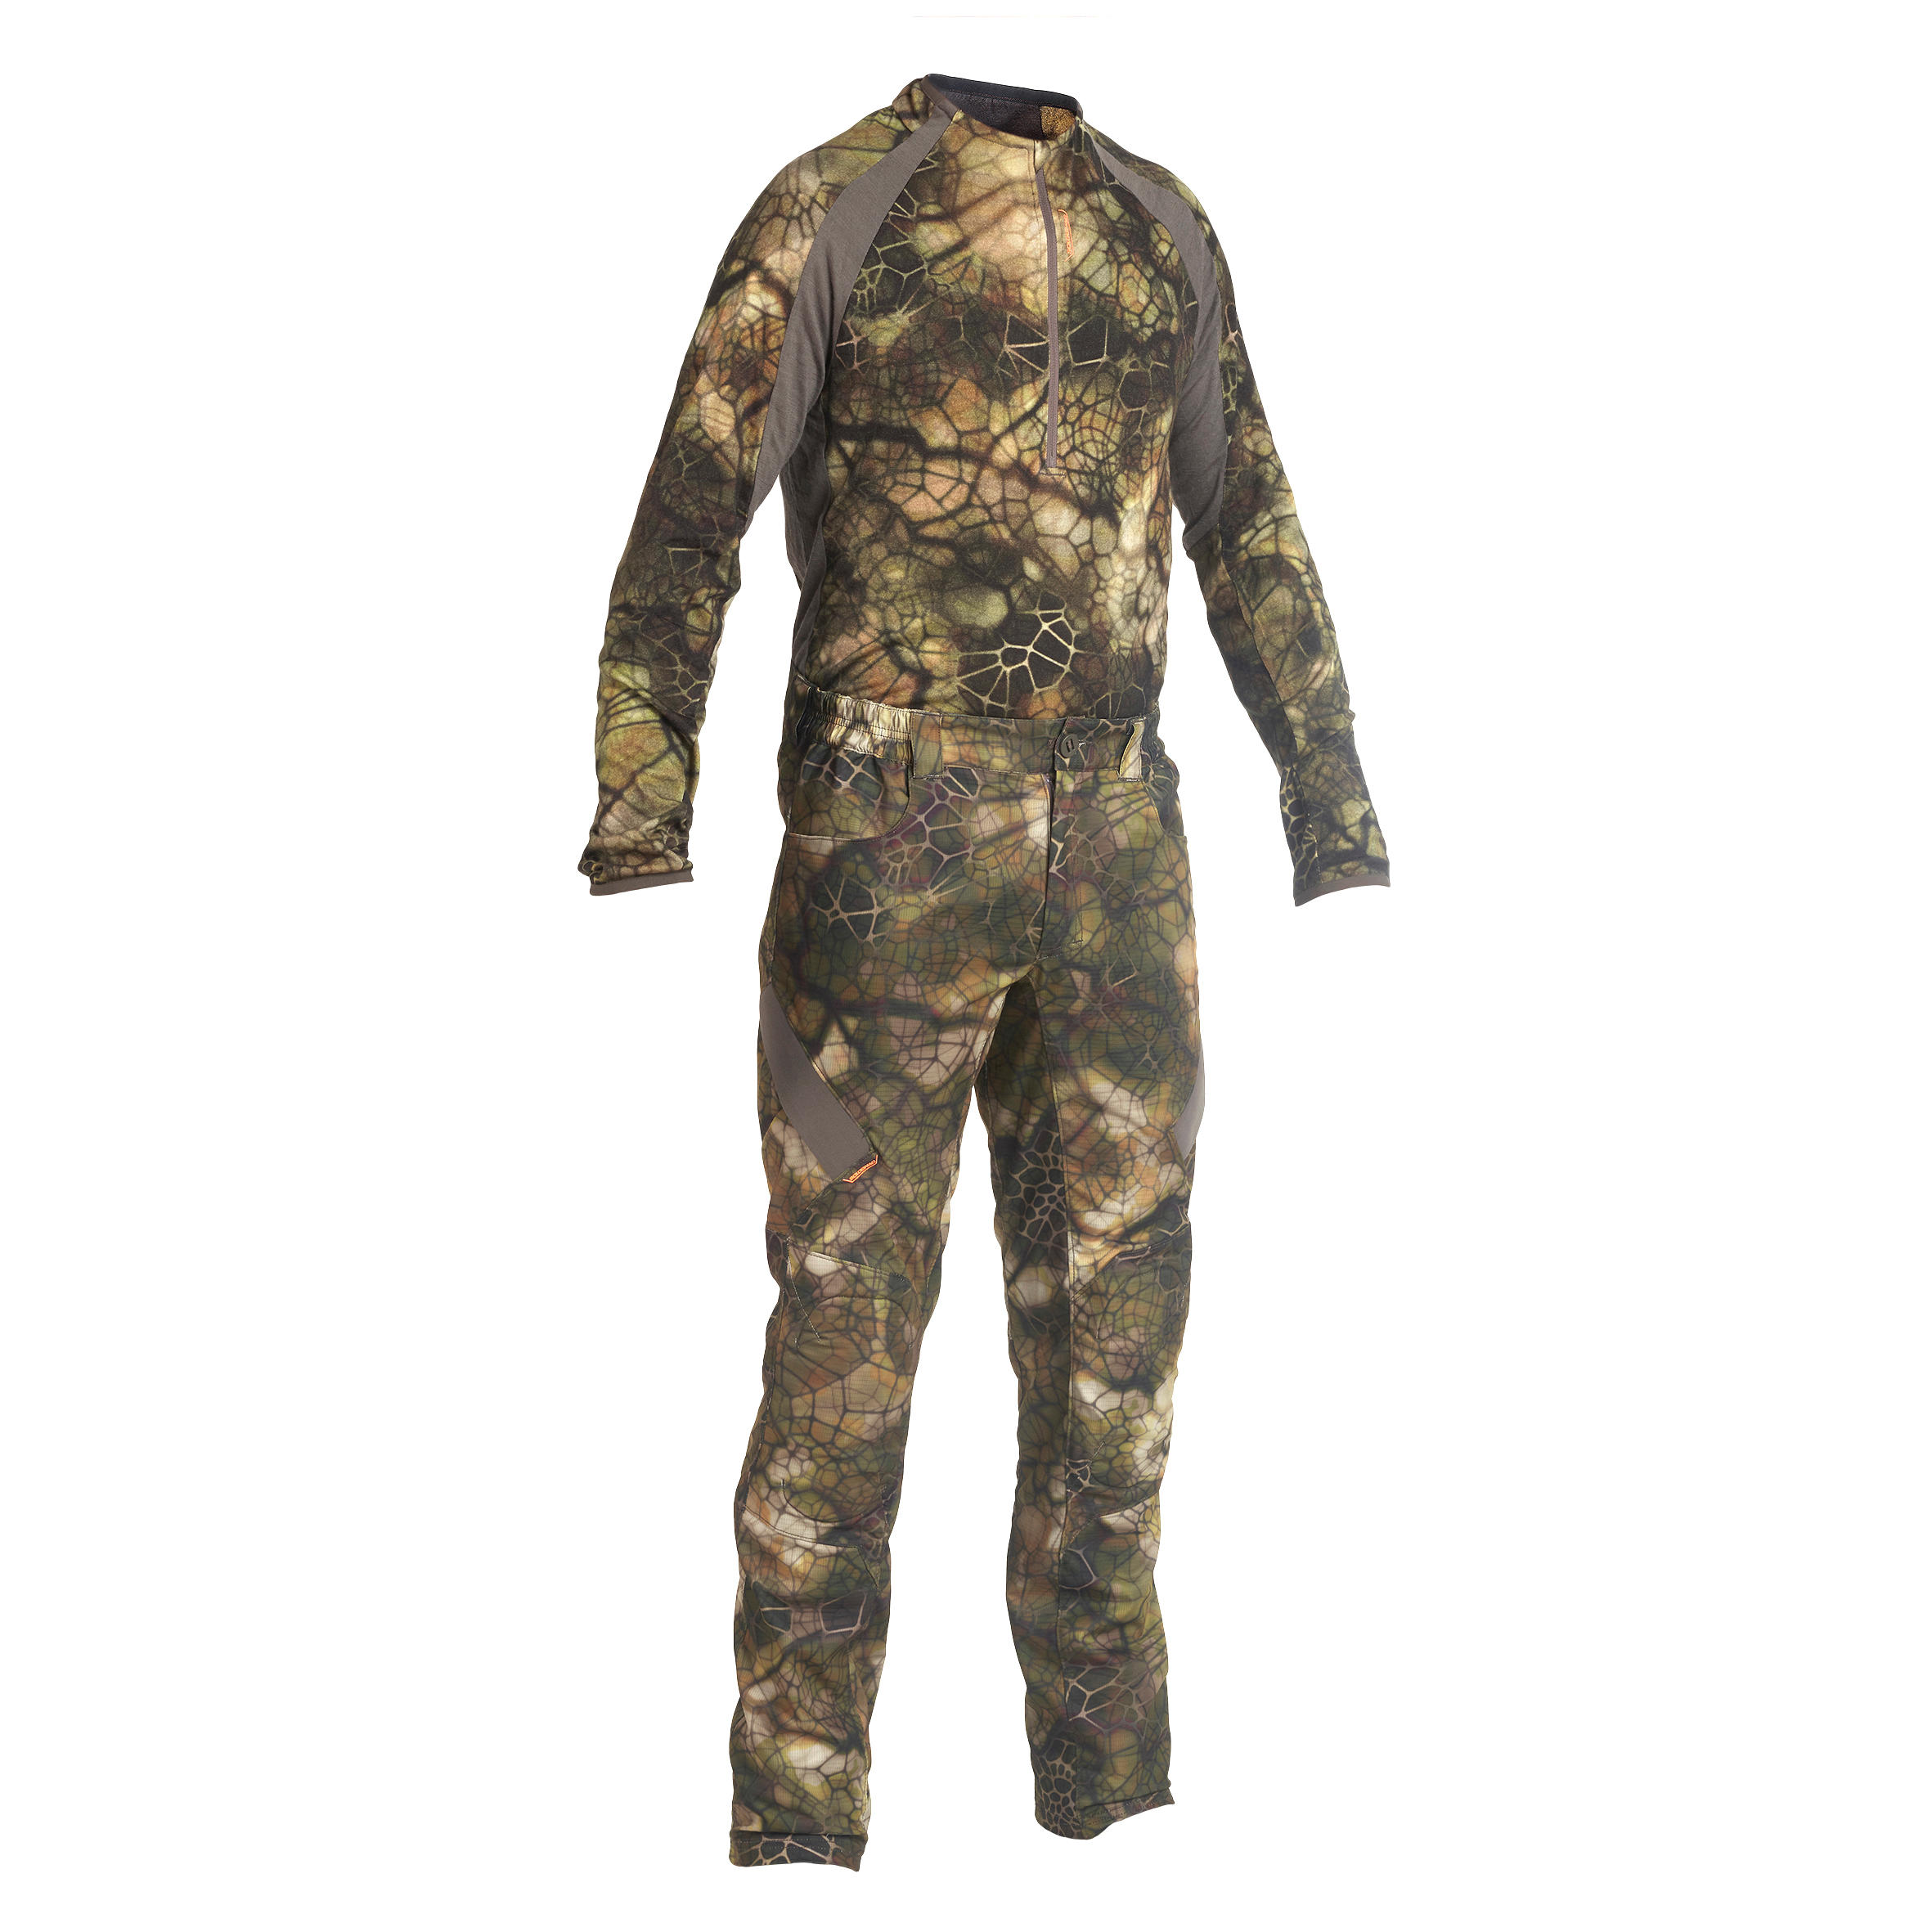 BLACKOVIS 3D FIELD PANT - Camofire Discount Hunting Gear, Camo and